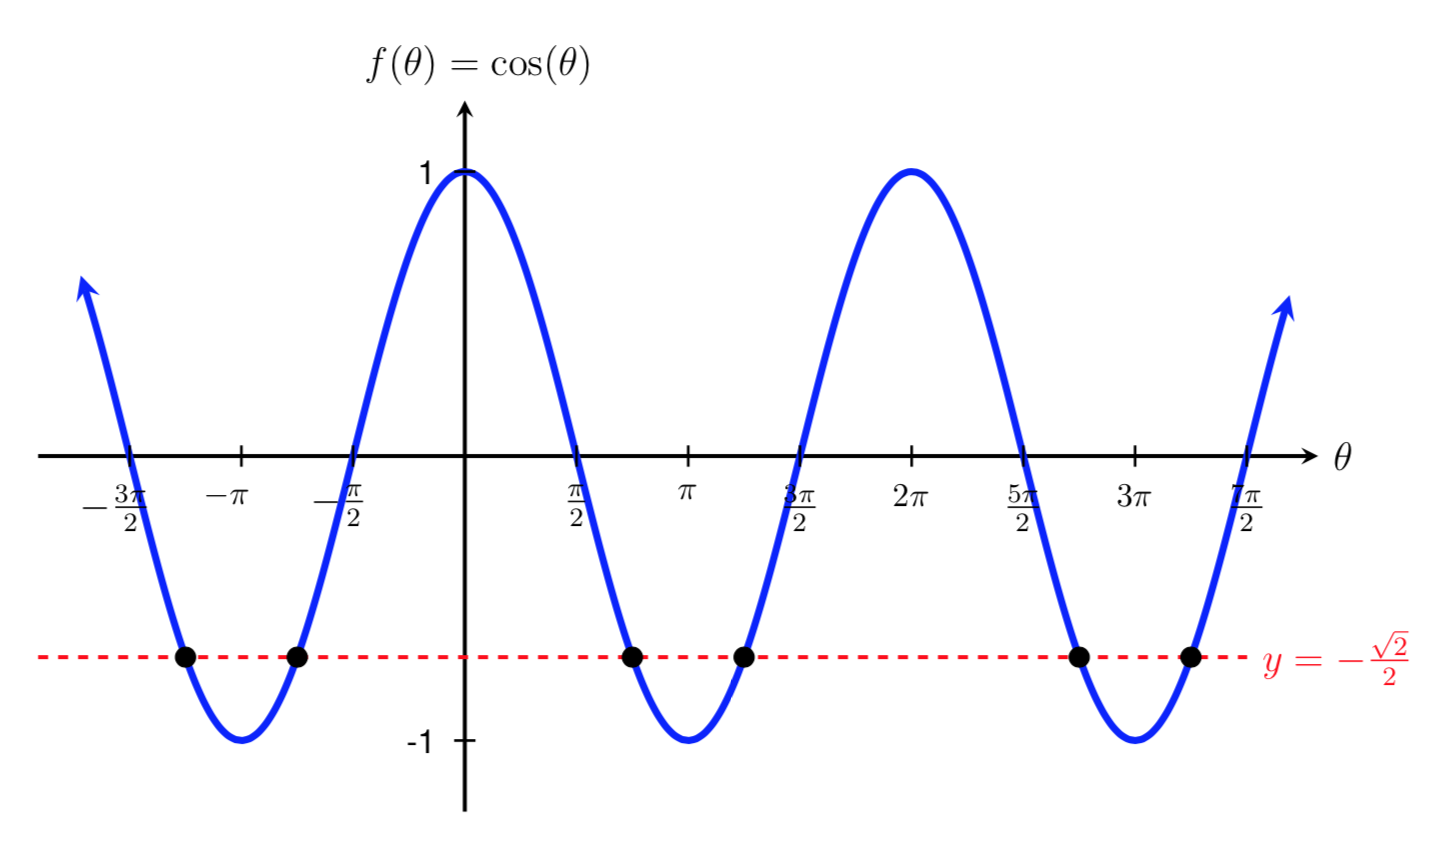 graph of sin(t)=-0.8